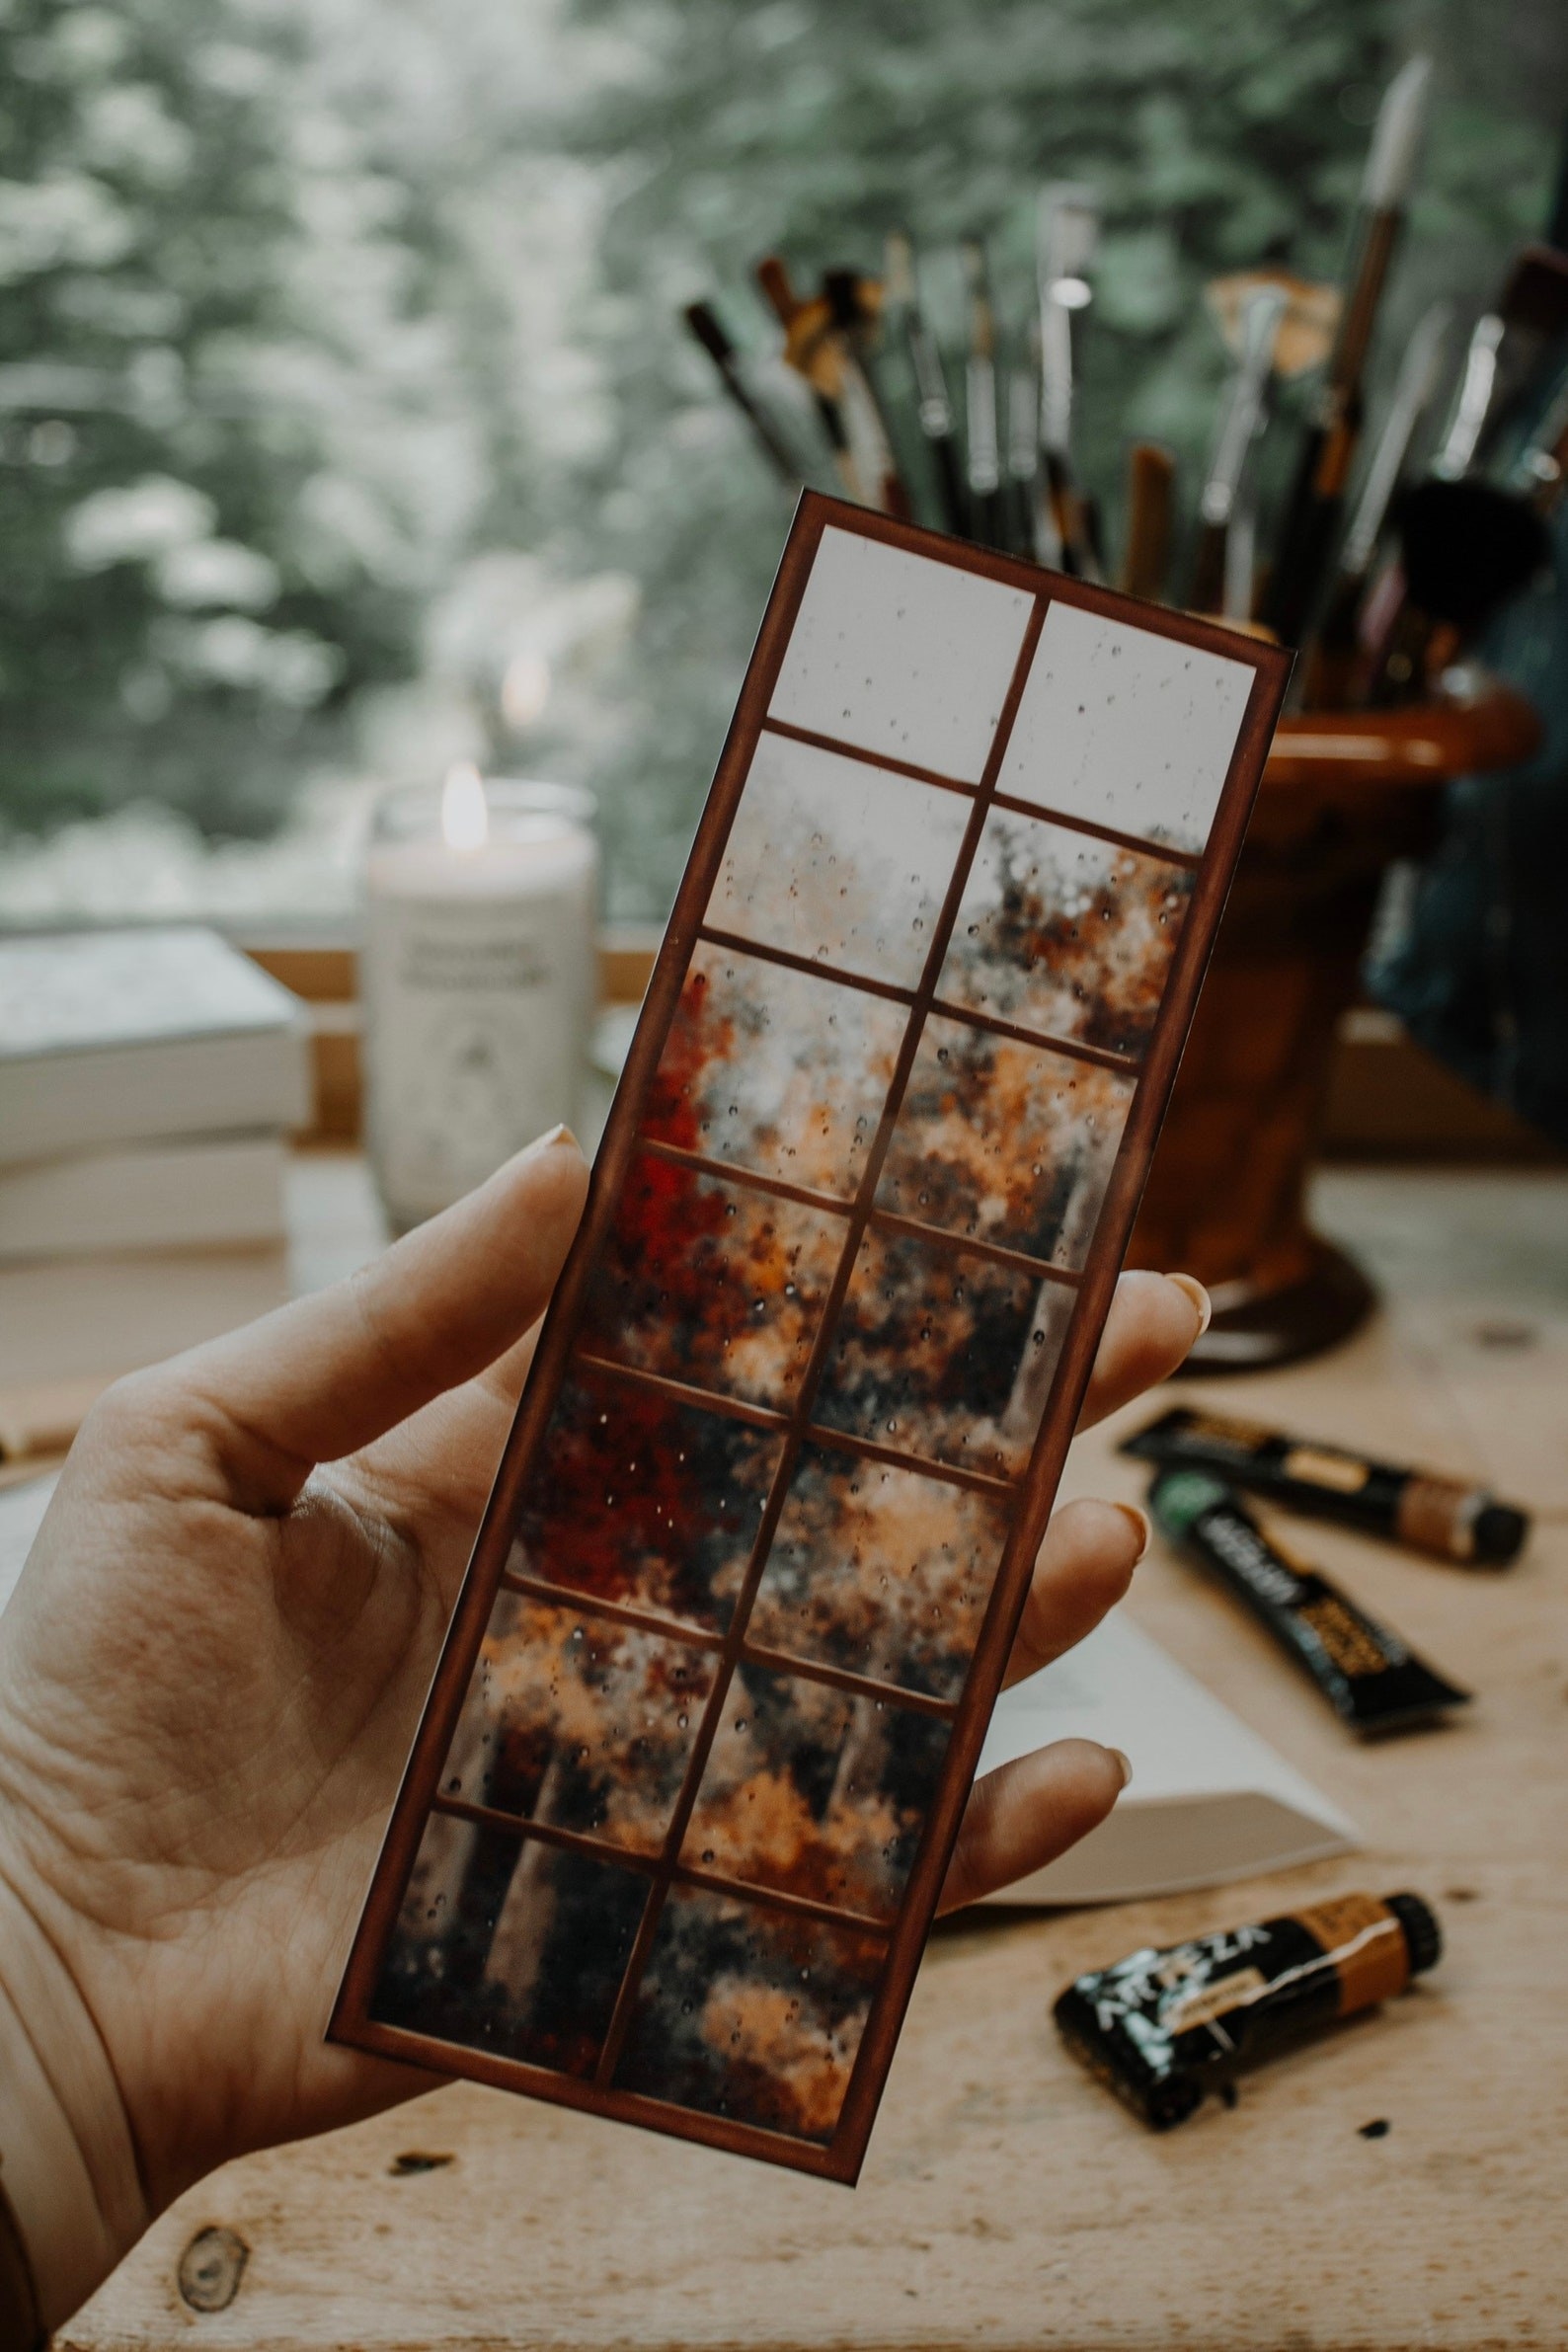 A bookmark with a window pane design that shows a rainy autumn day